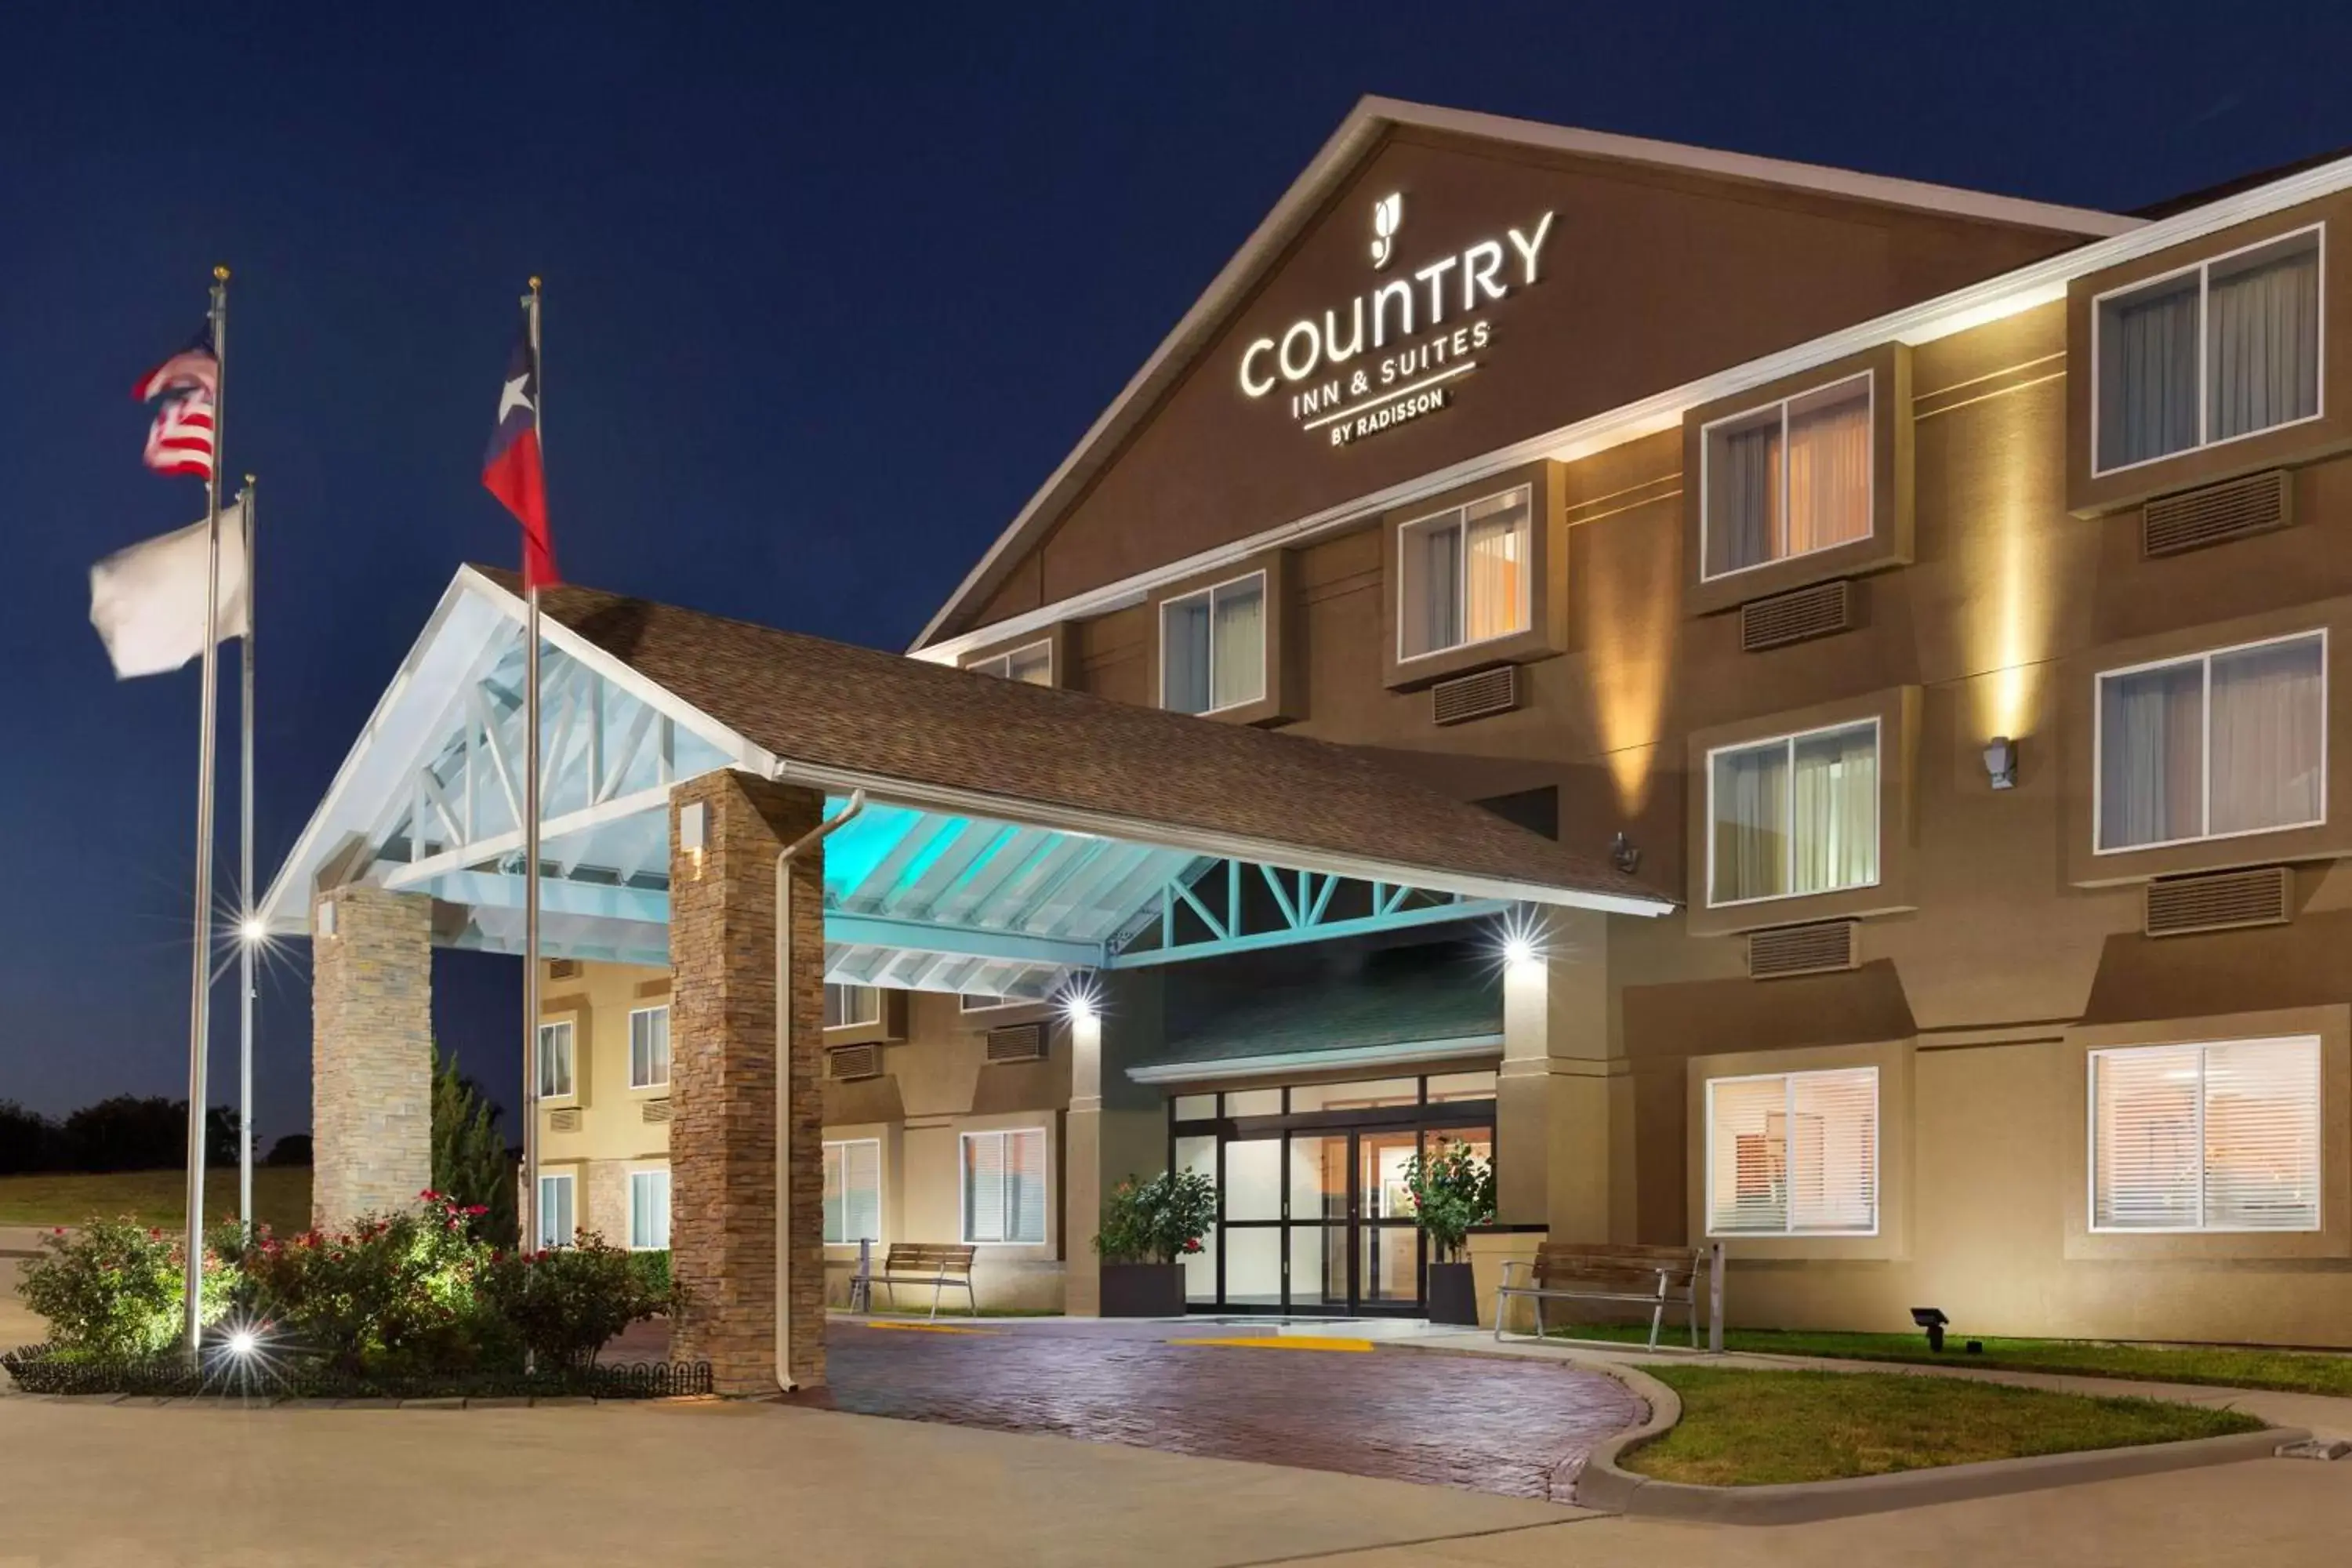 Property building in Country Inn & Suites by Radisson, Fort Worth West l-30 NAS JRB